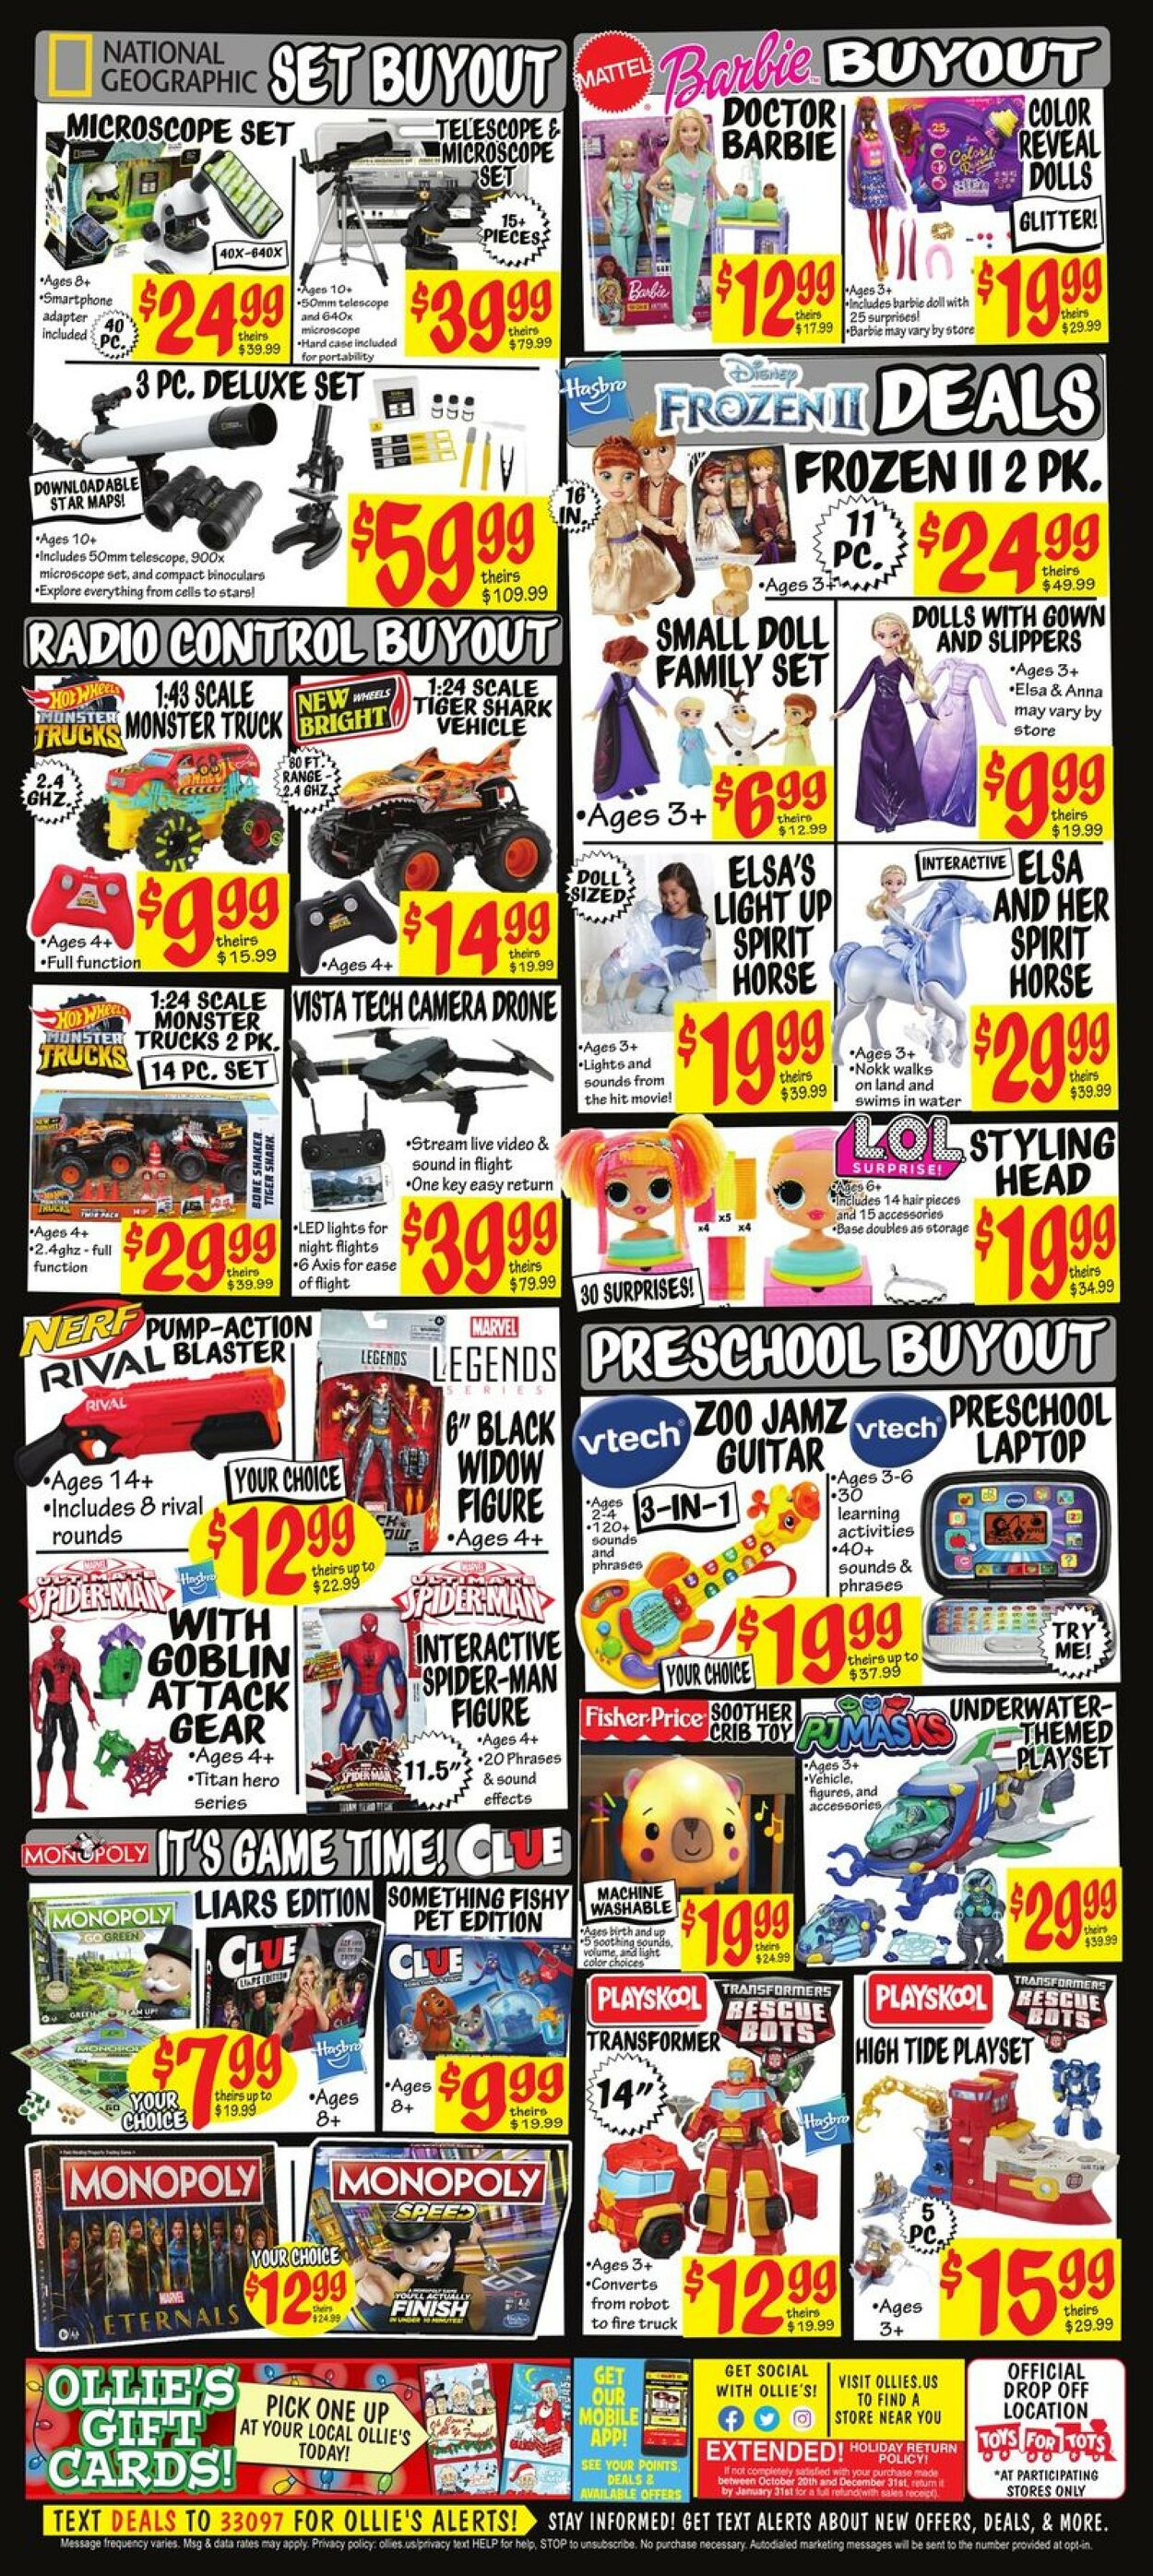 Ollie's Ad from 11/23/2022